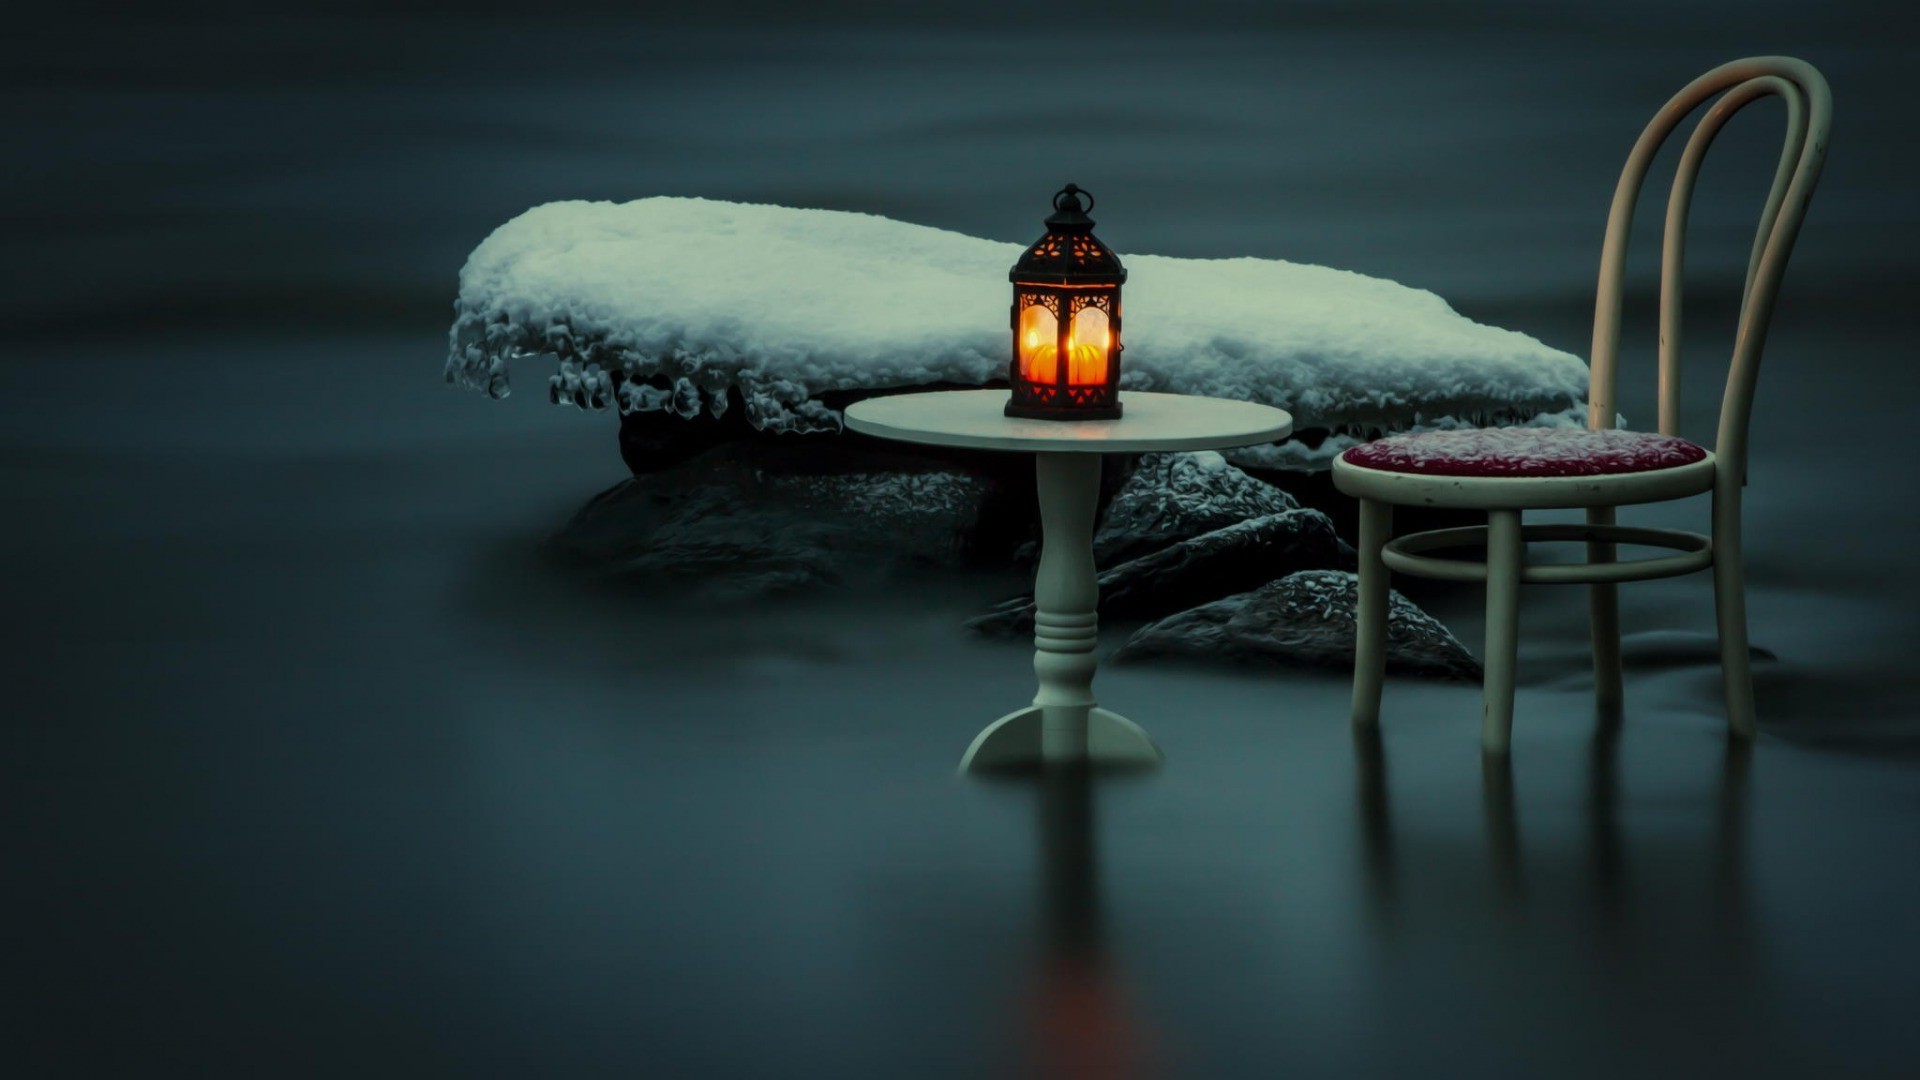 photography, Artwork, Nature, Water, Snow, Winter, Rock, Stones, Table, Chair, Ice, Icicle, Lantern, Lamps, Blurred, Reflection, Long Exposure, Candles Wallpaper